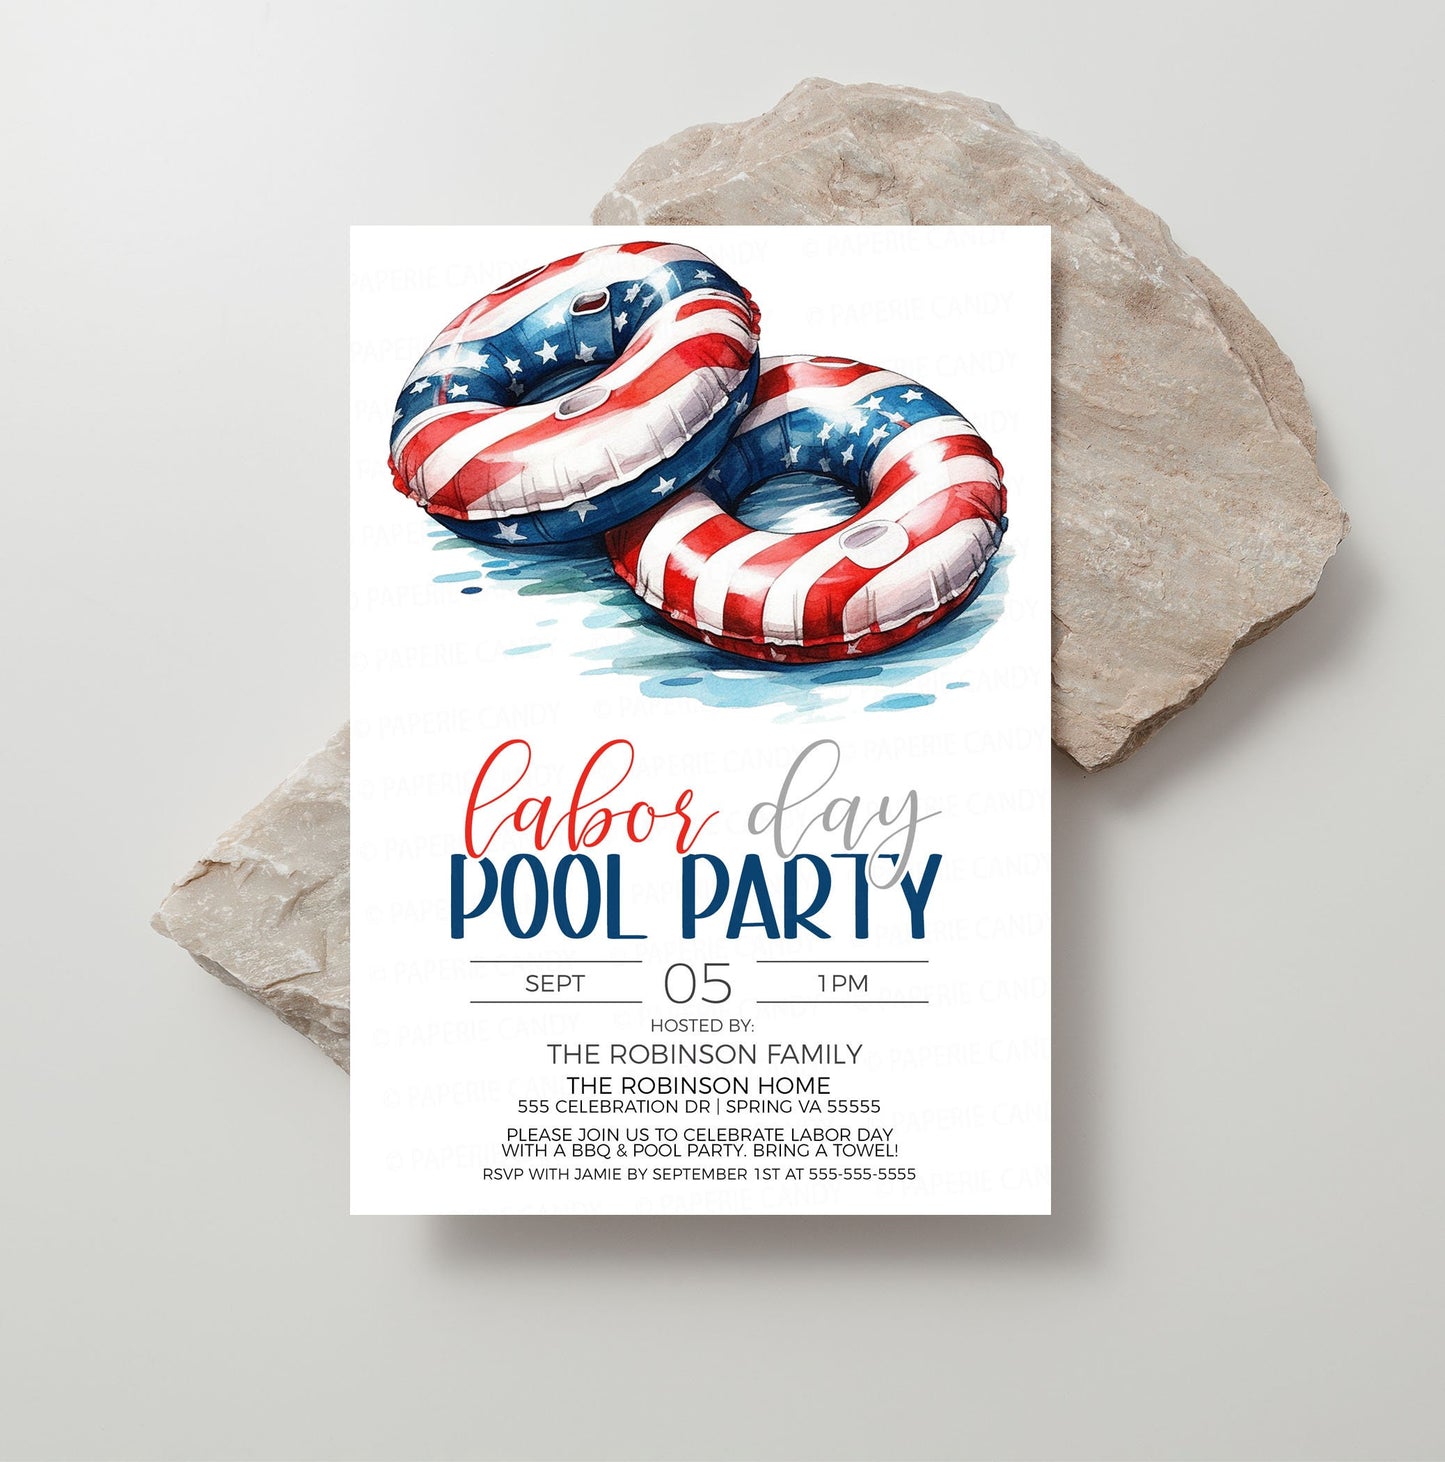 Labor Day Pool Party Invitation, Labor Day Pool Invite, Labor Day BBQ Fireworks Pool Party, Patriotic Pool Party Editable Printable Template